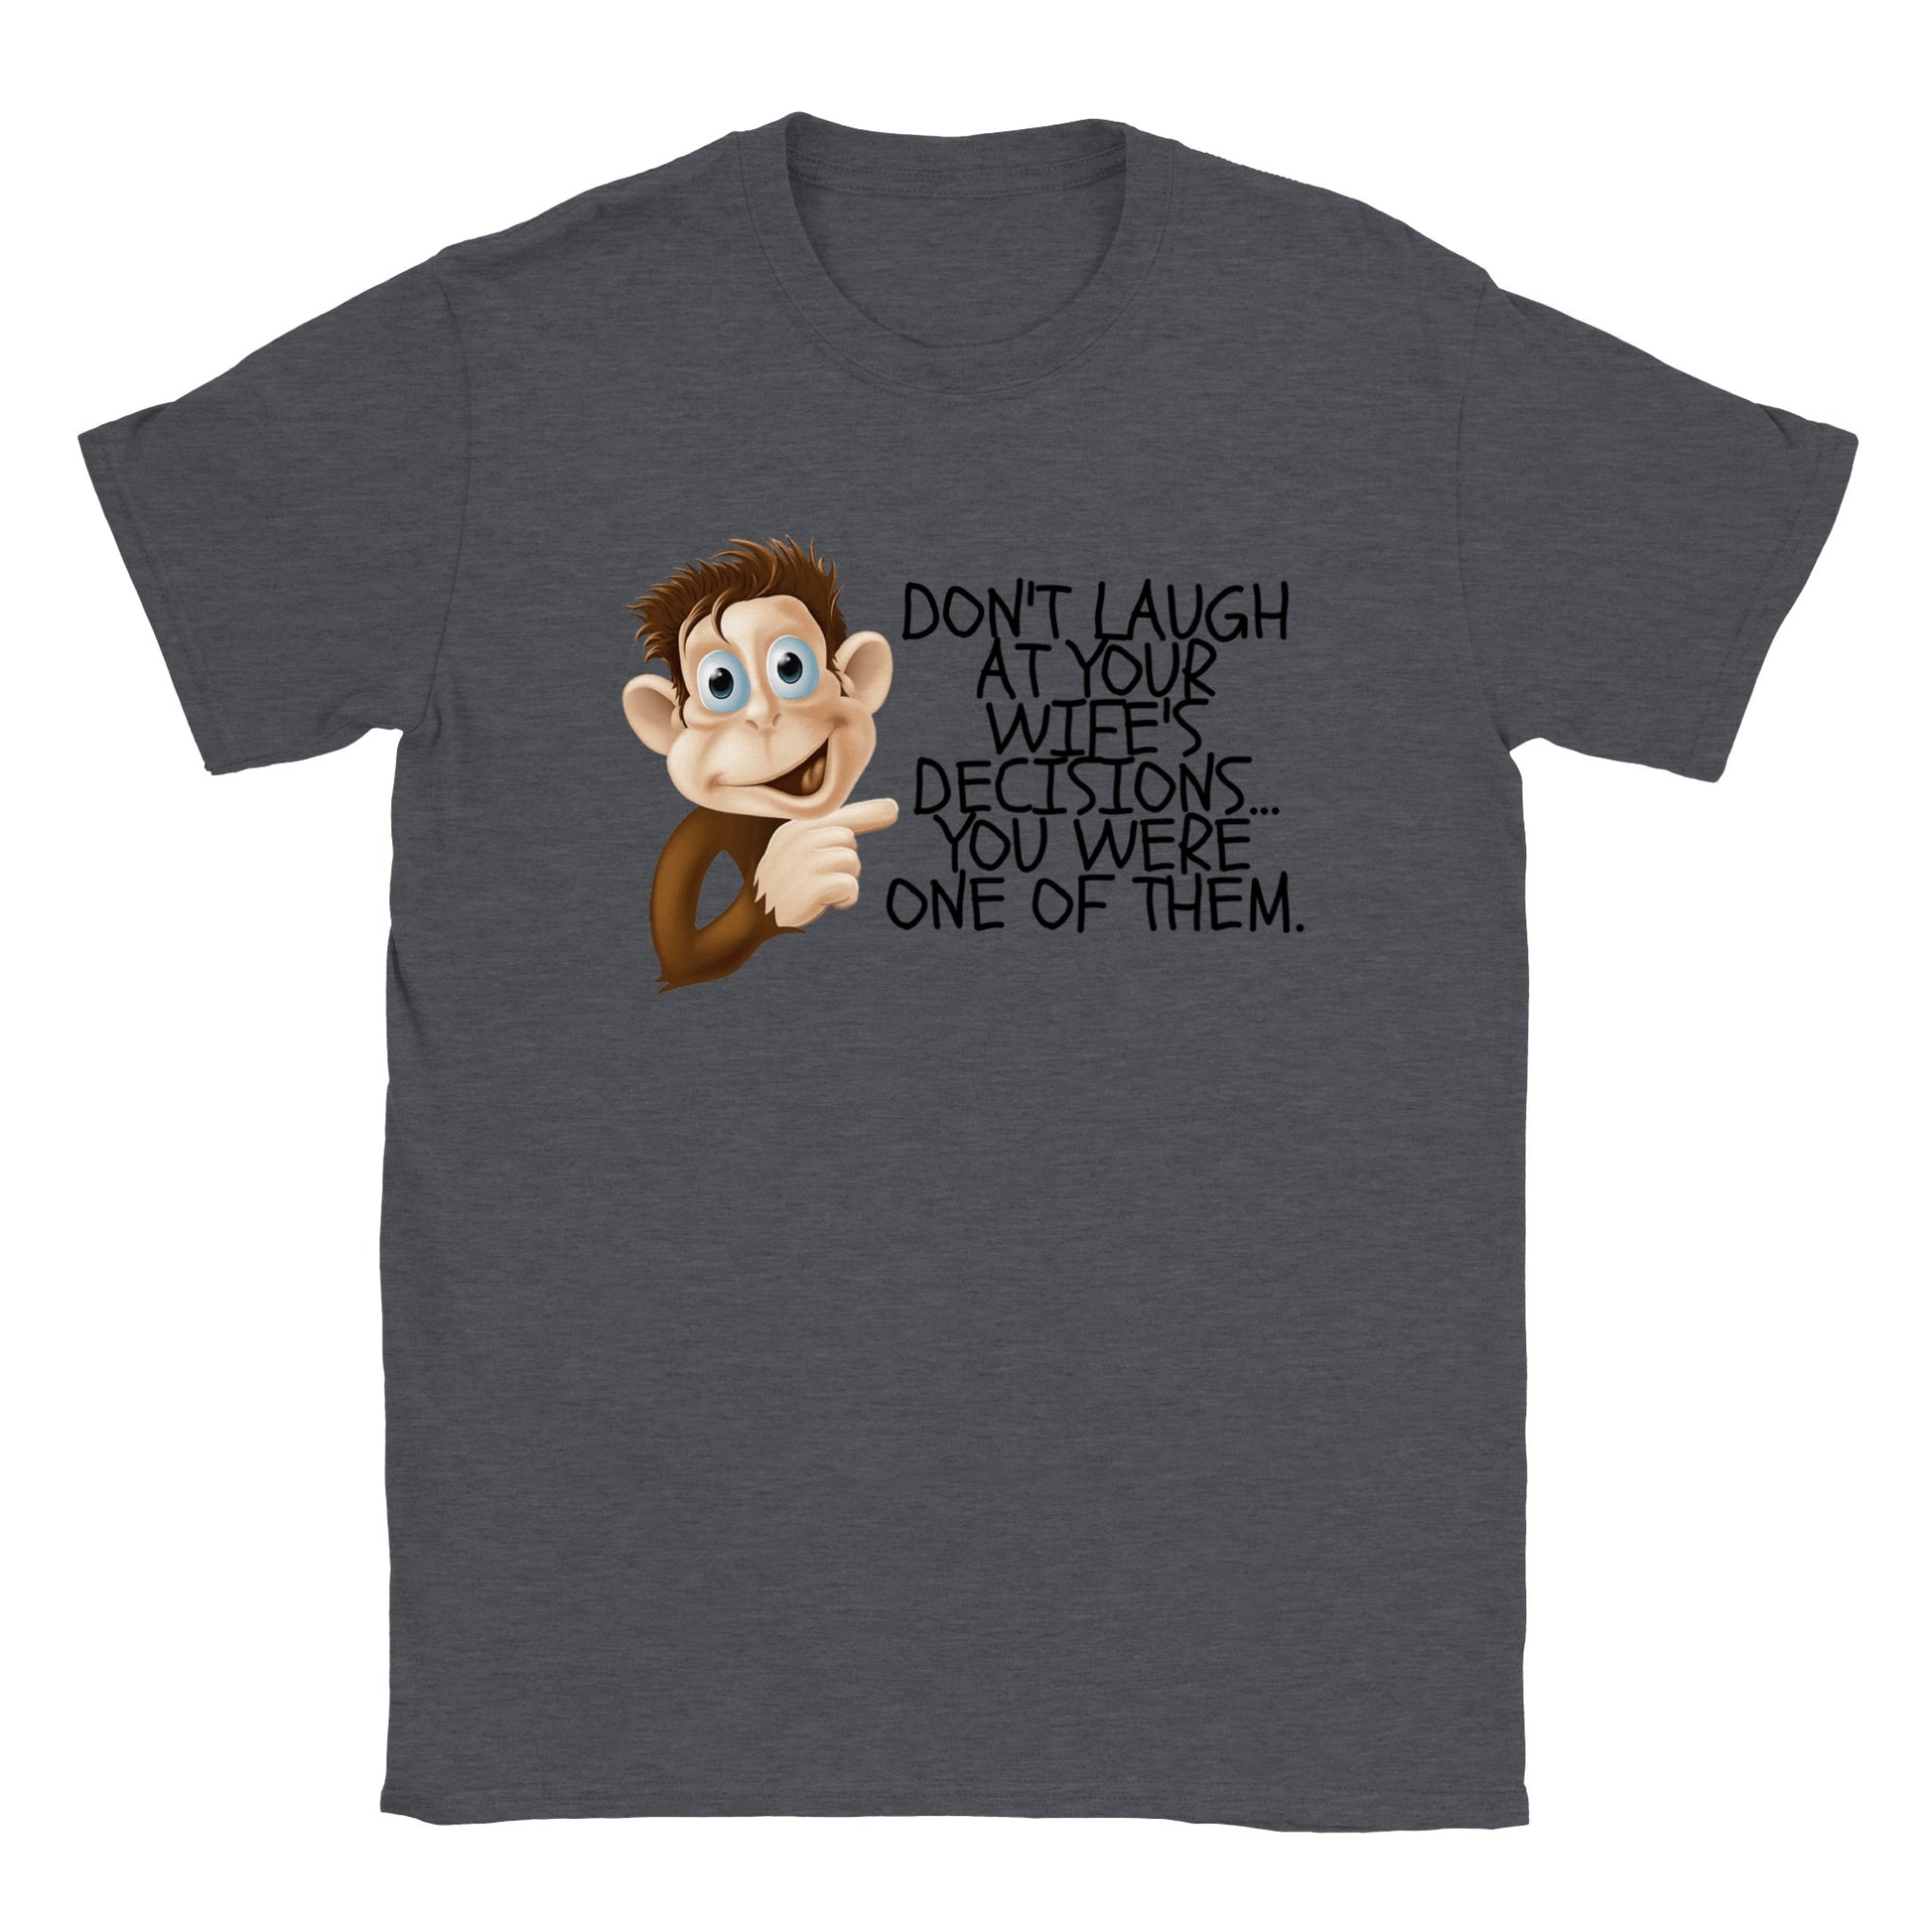 Don't Laugh at Your Wife's Decisions T-shirt - Mister Snarky's